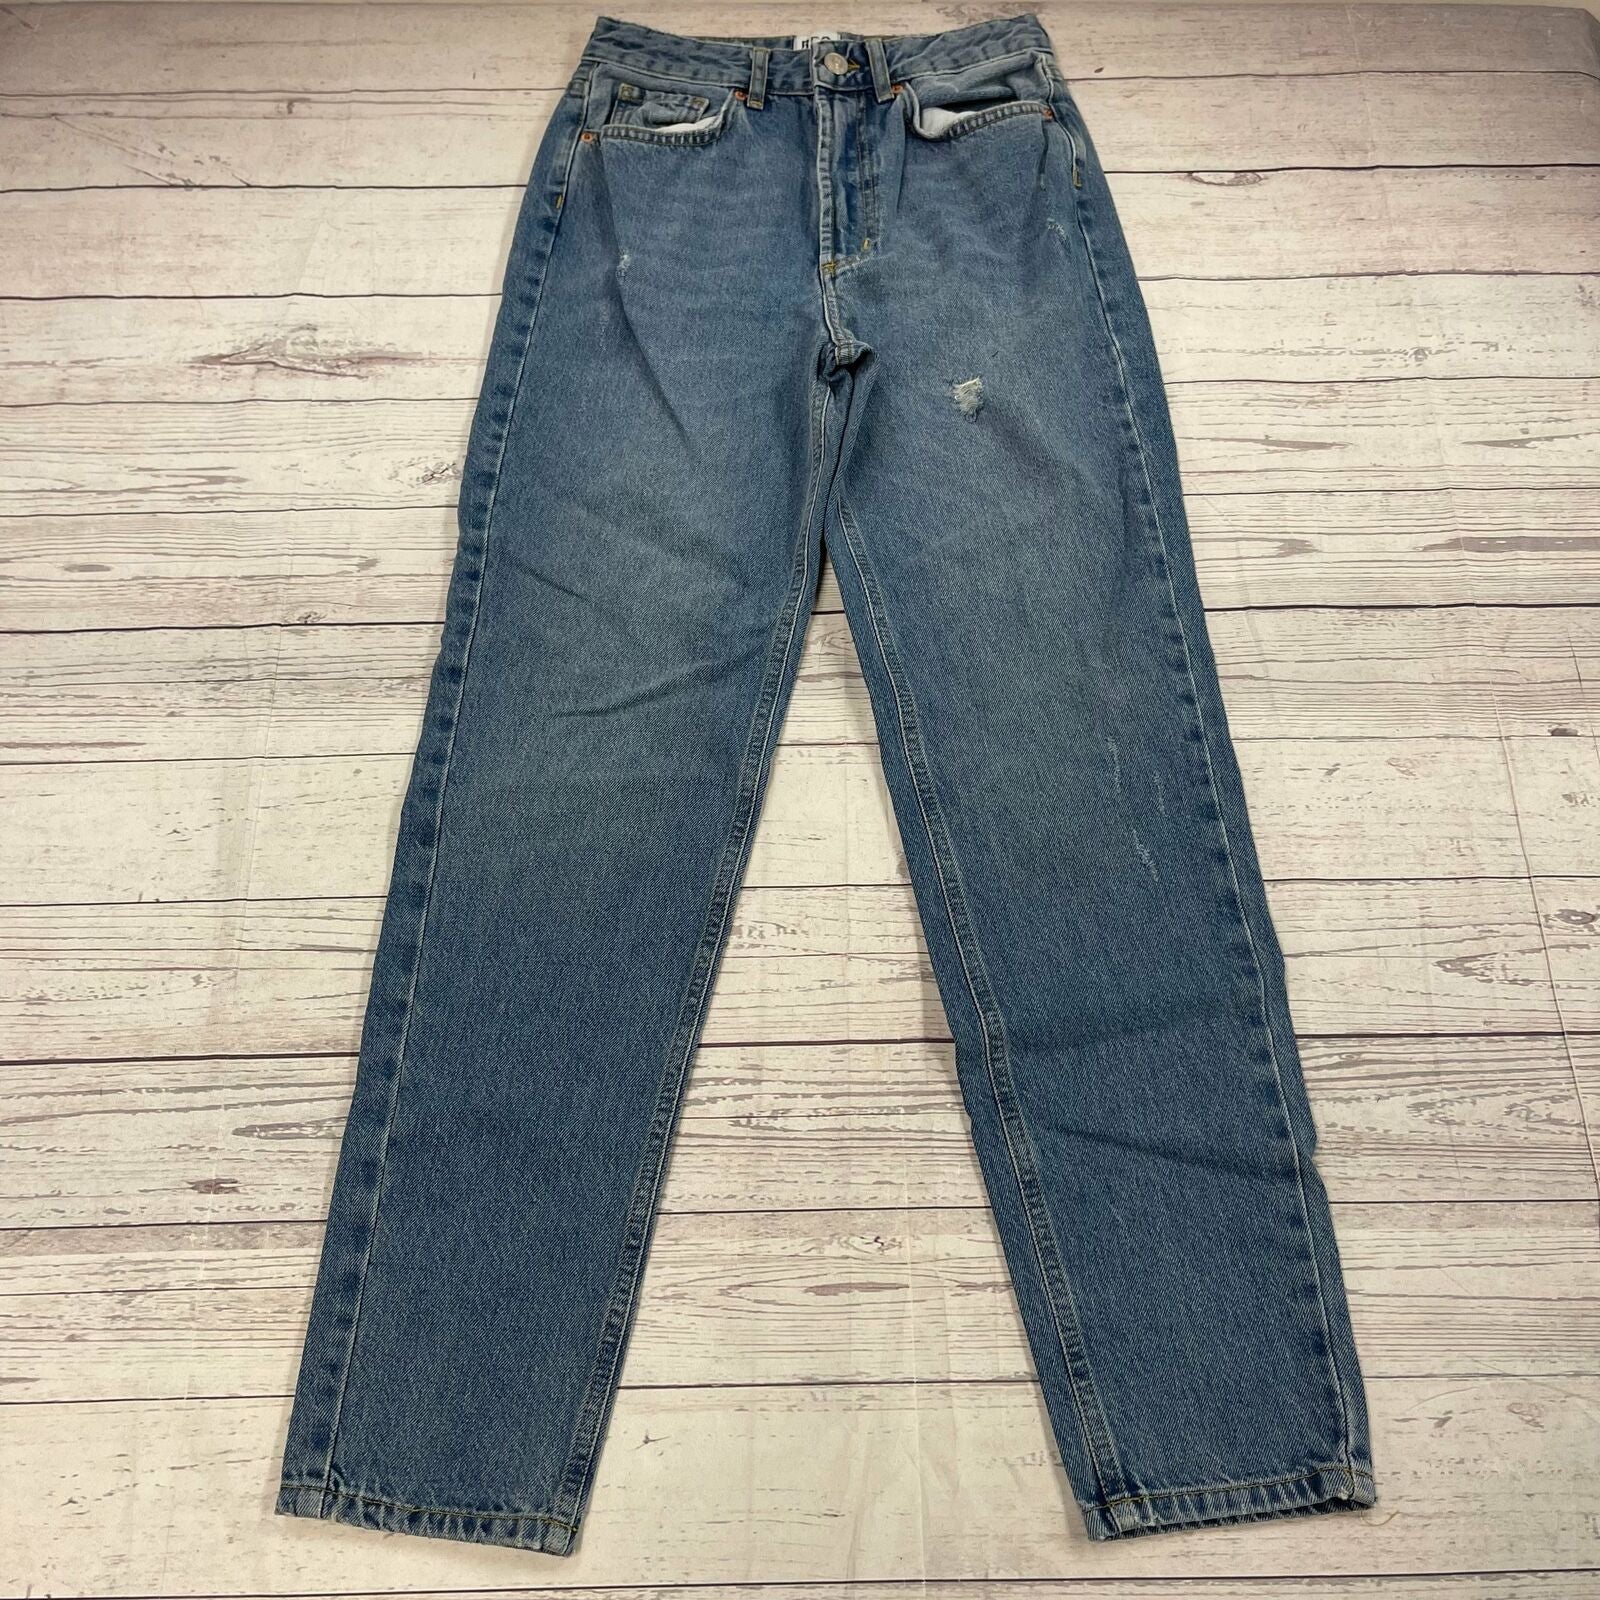 BDG High Waisted Distressed Denim Blue Mom Jeans Women's Size 27